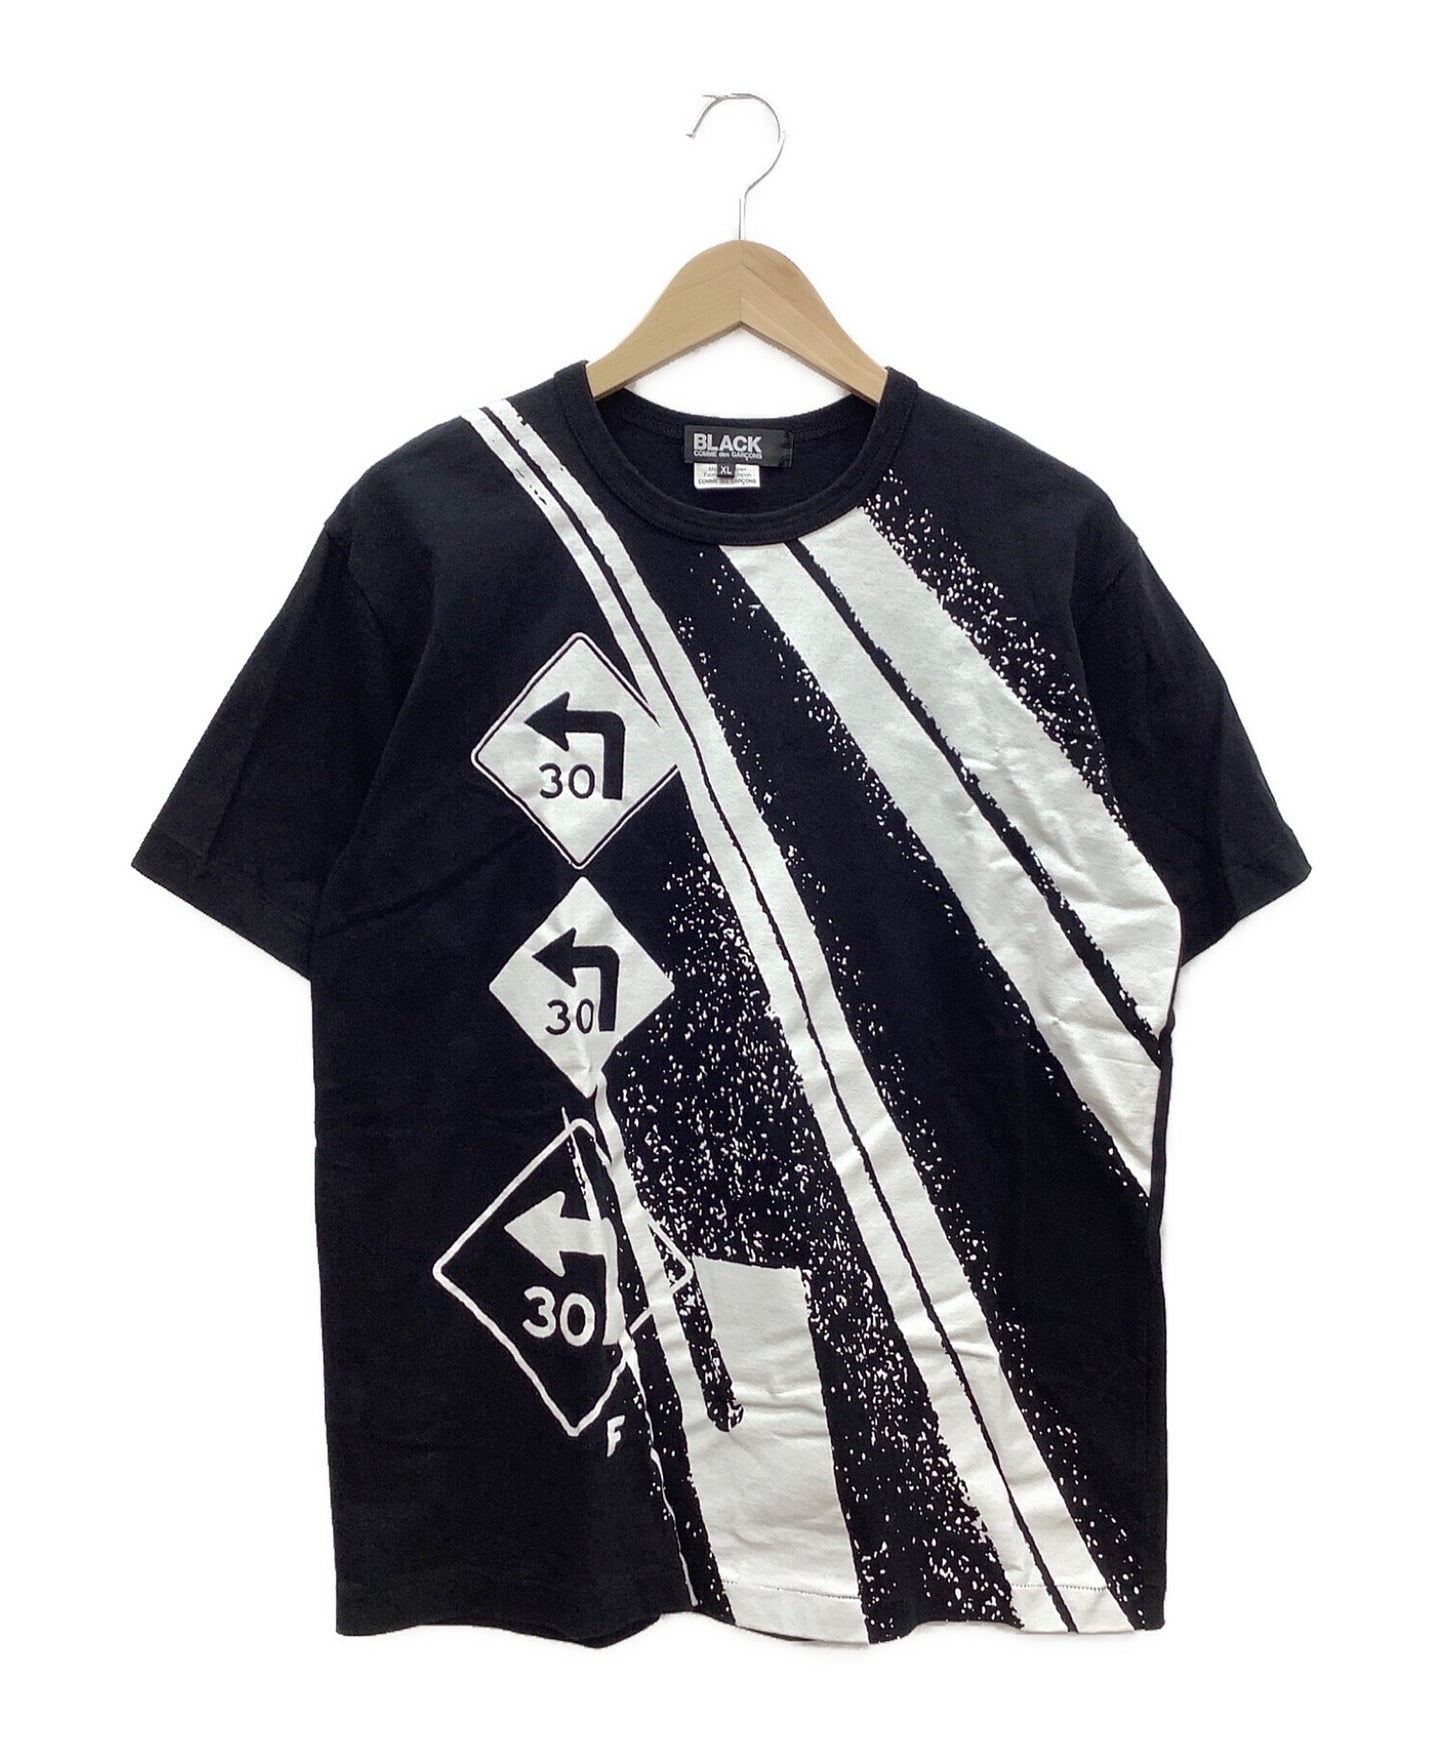 BLACK COMME des GARCONS printed cut-and-sew 1E-T004 | Archive Factory